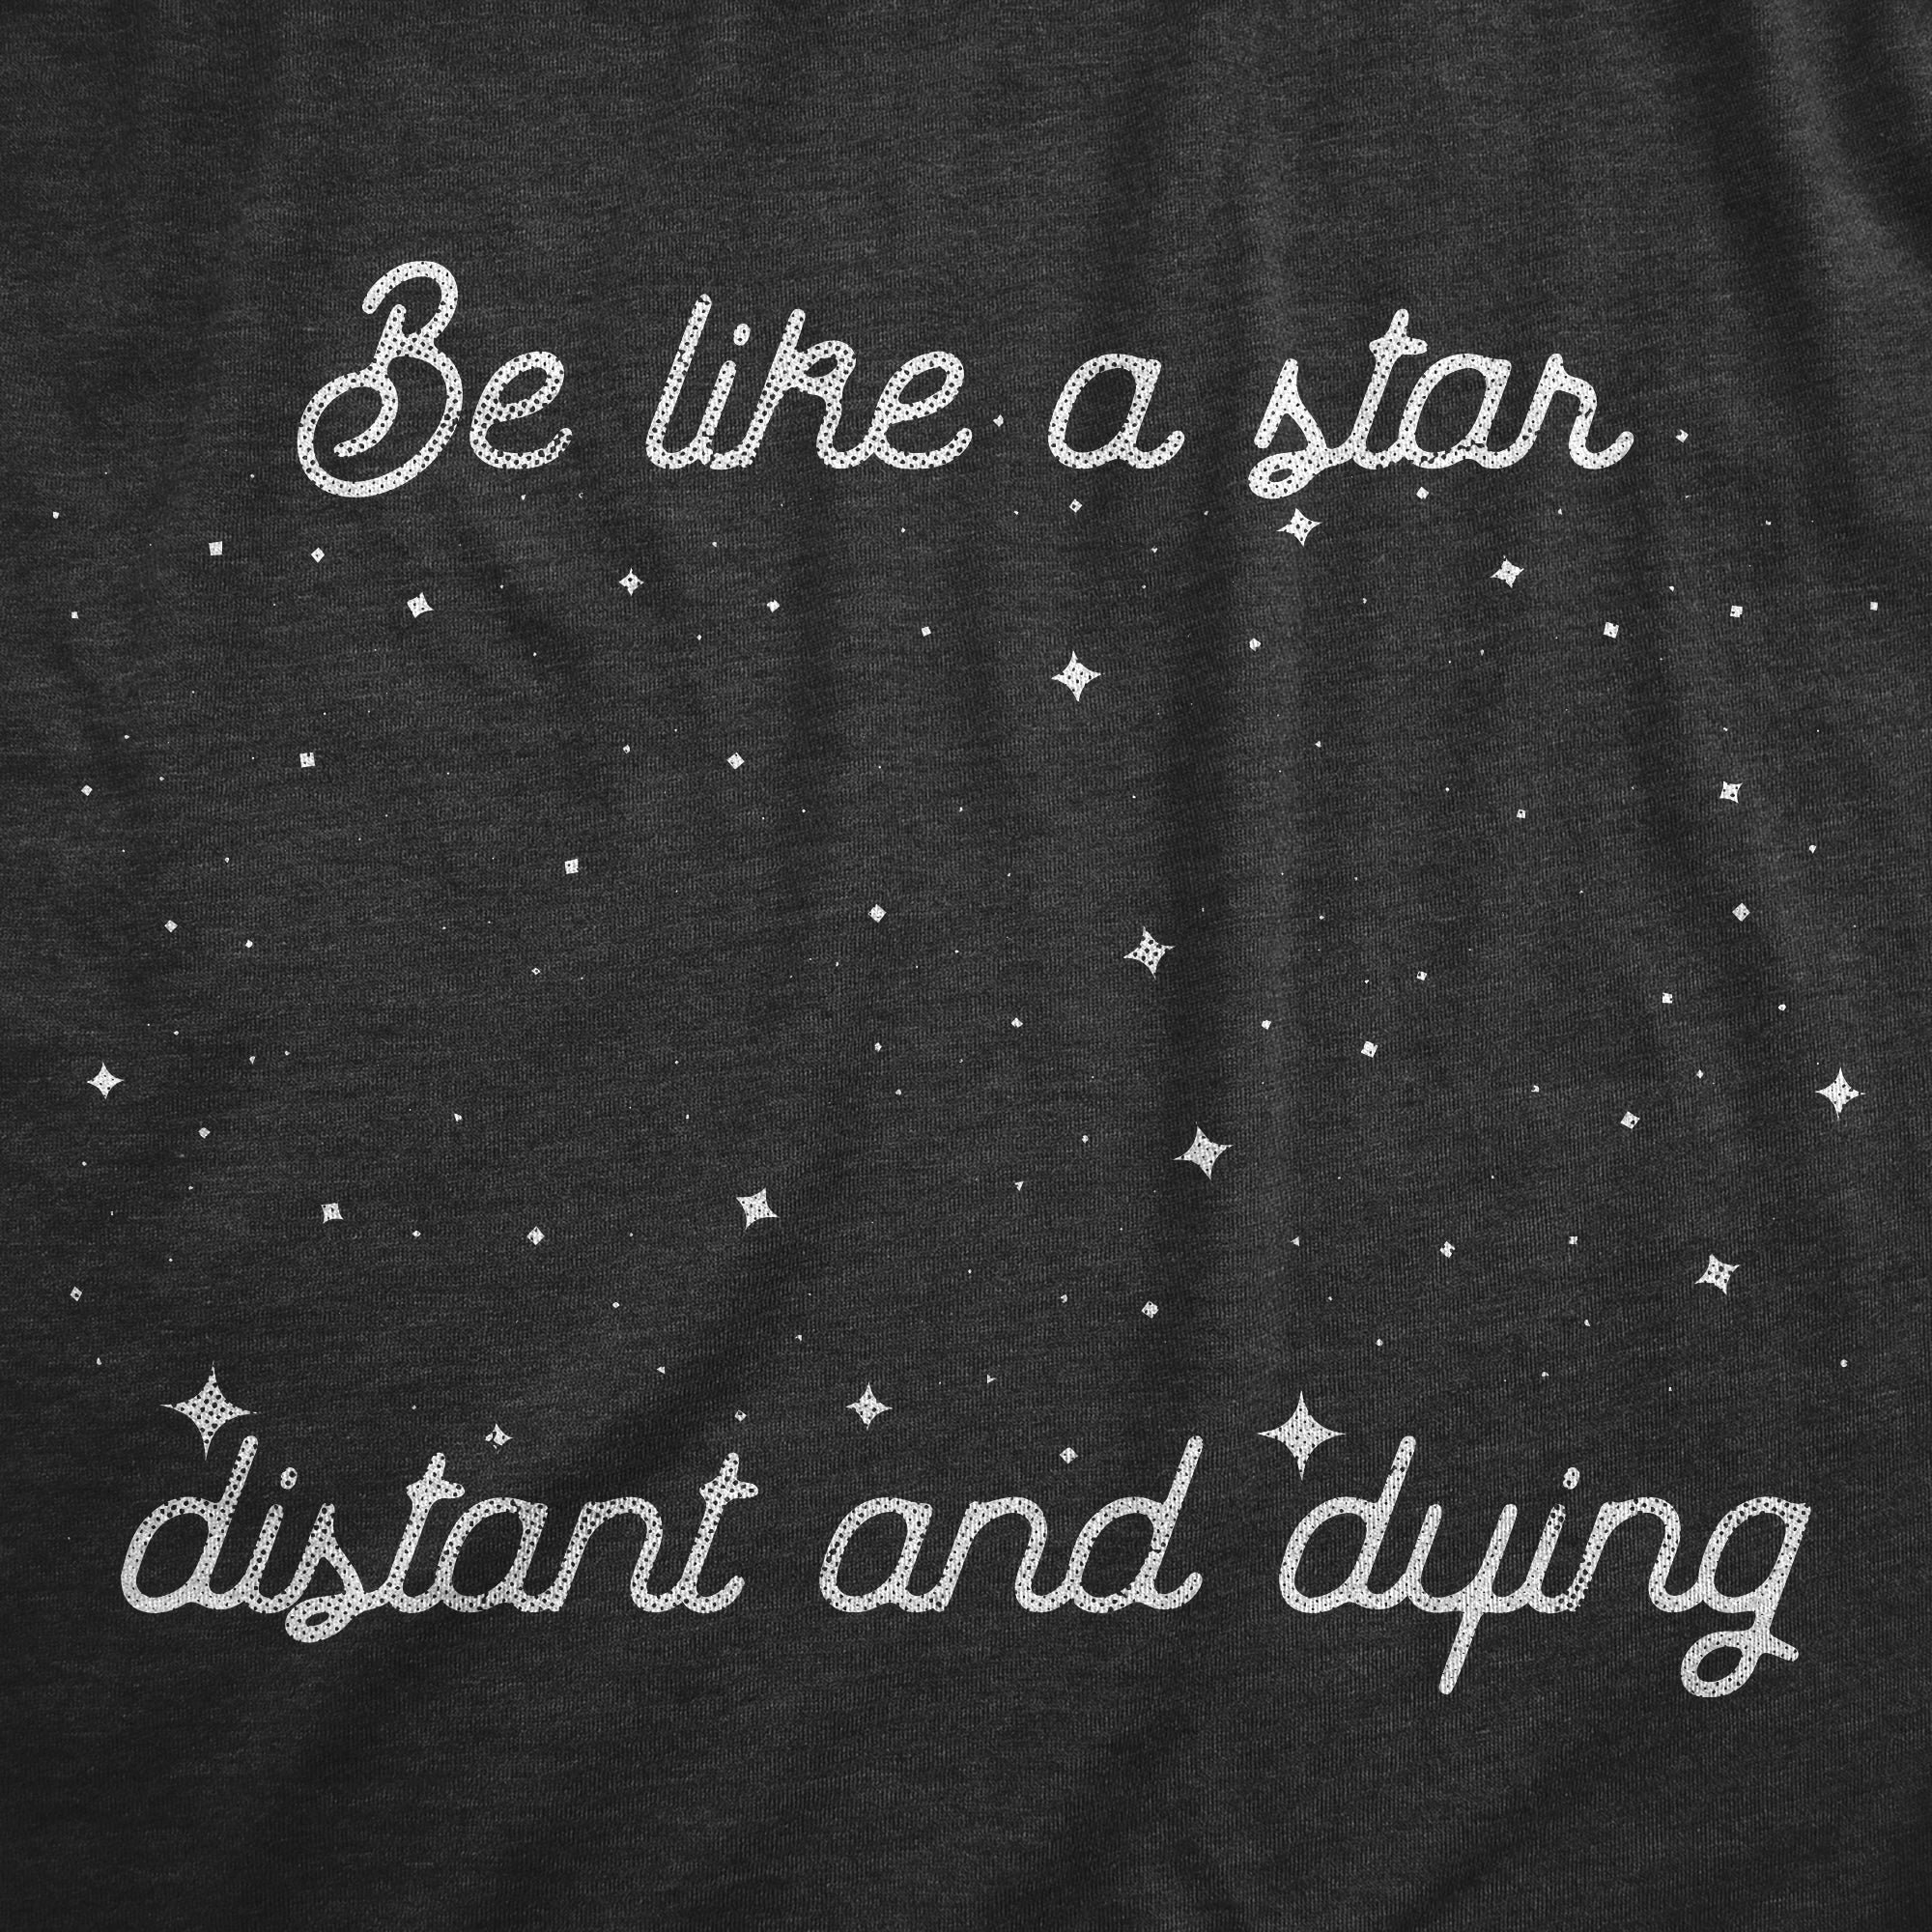 Funny Heather Black - STAR Be Like A Star Distant And Dying Mens T Shirt Nerdy Space sarcastic Tee